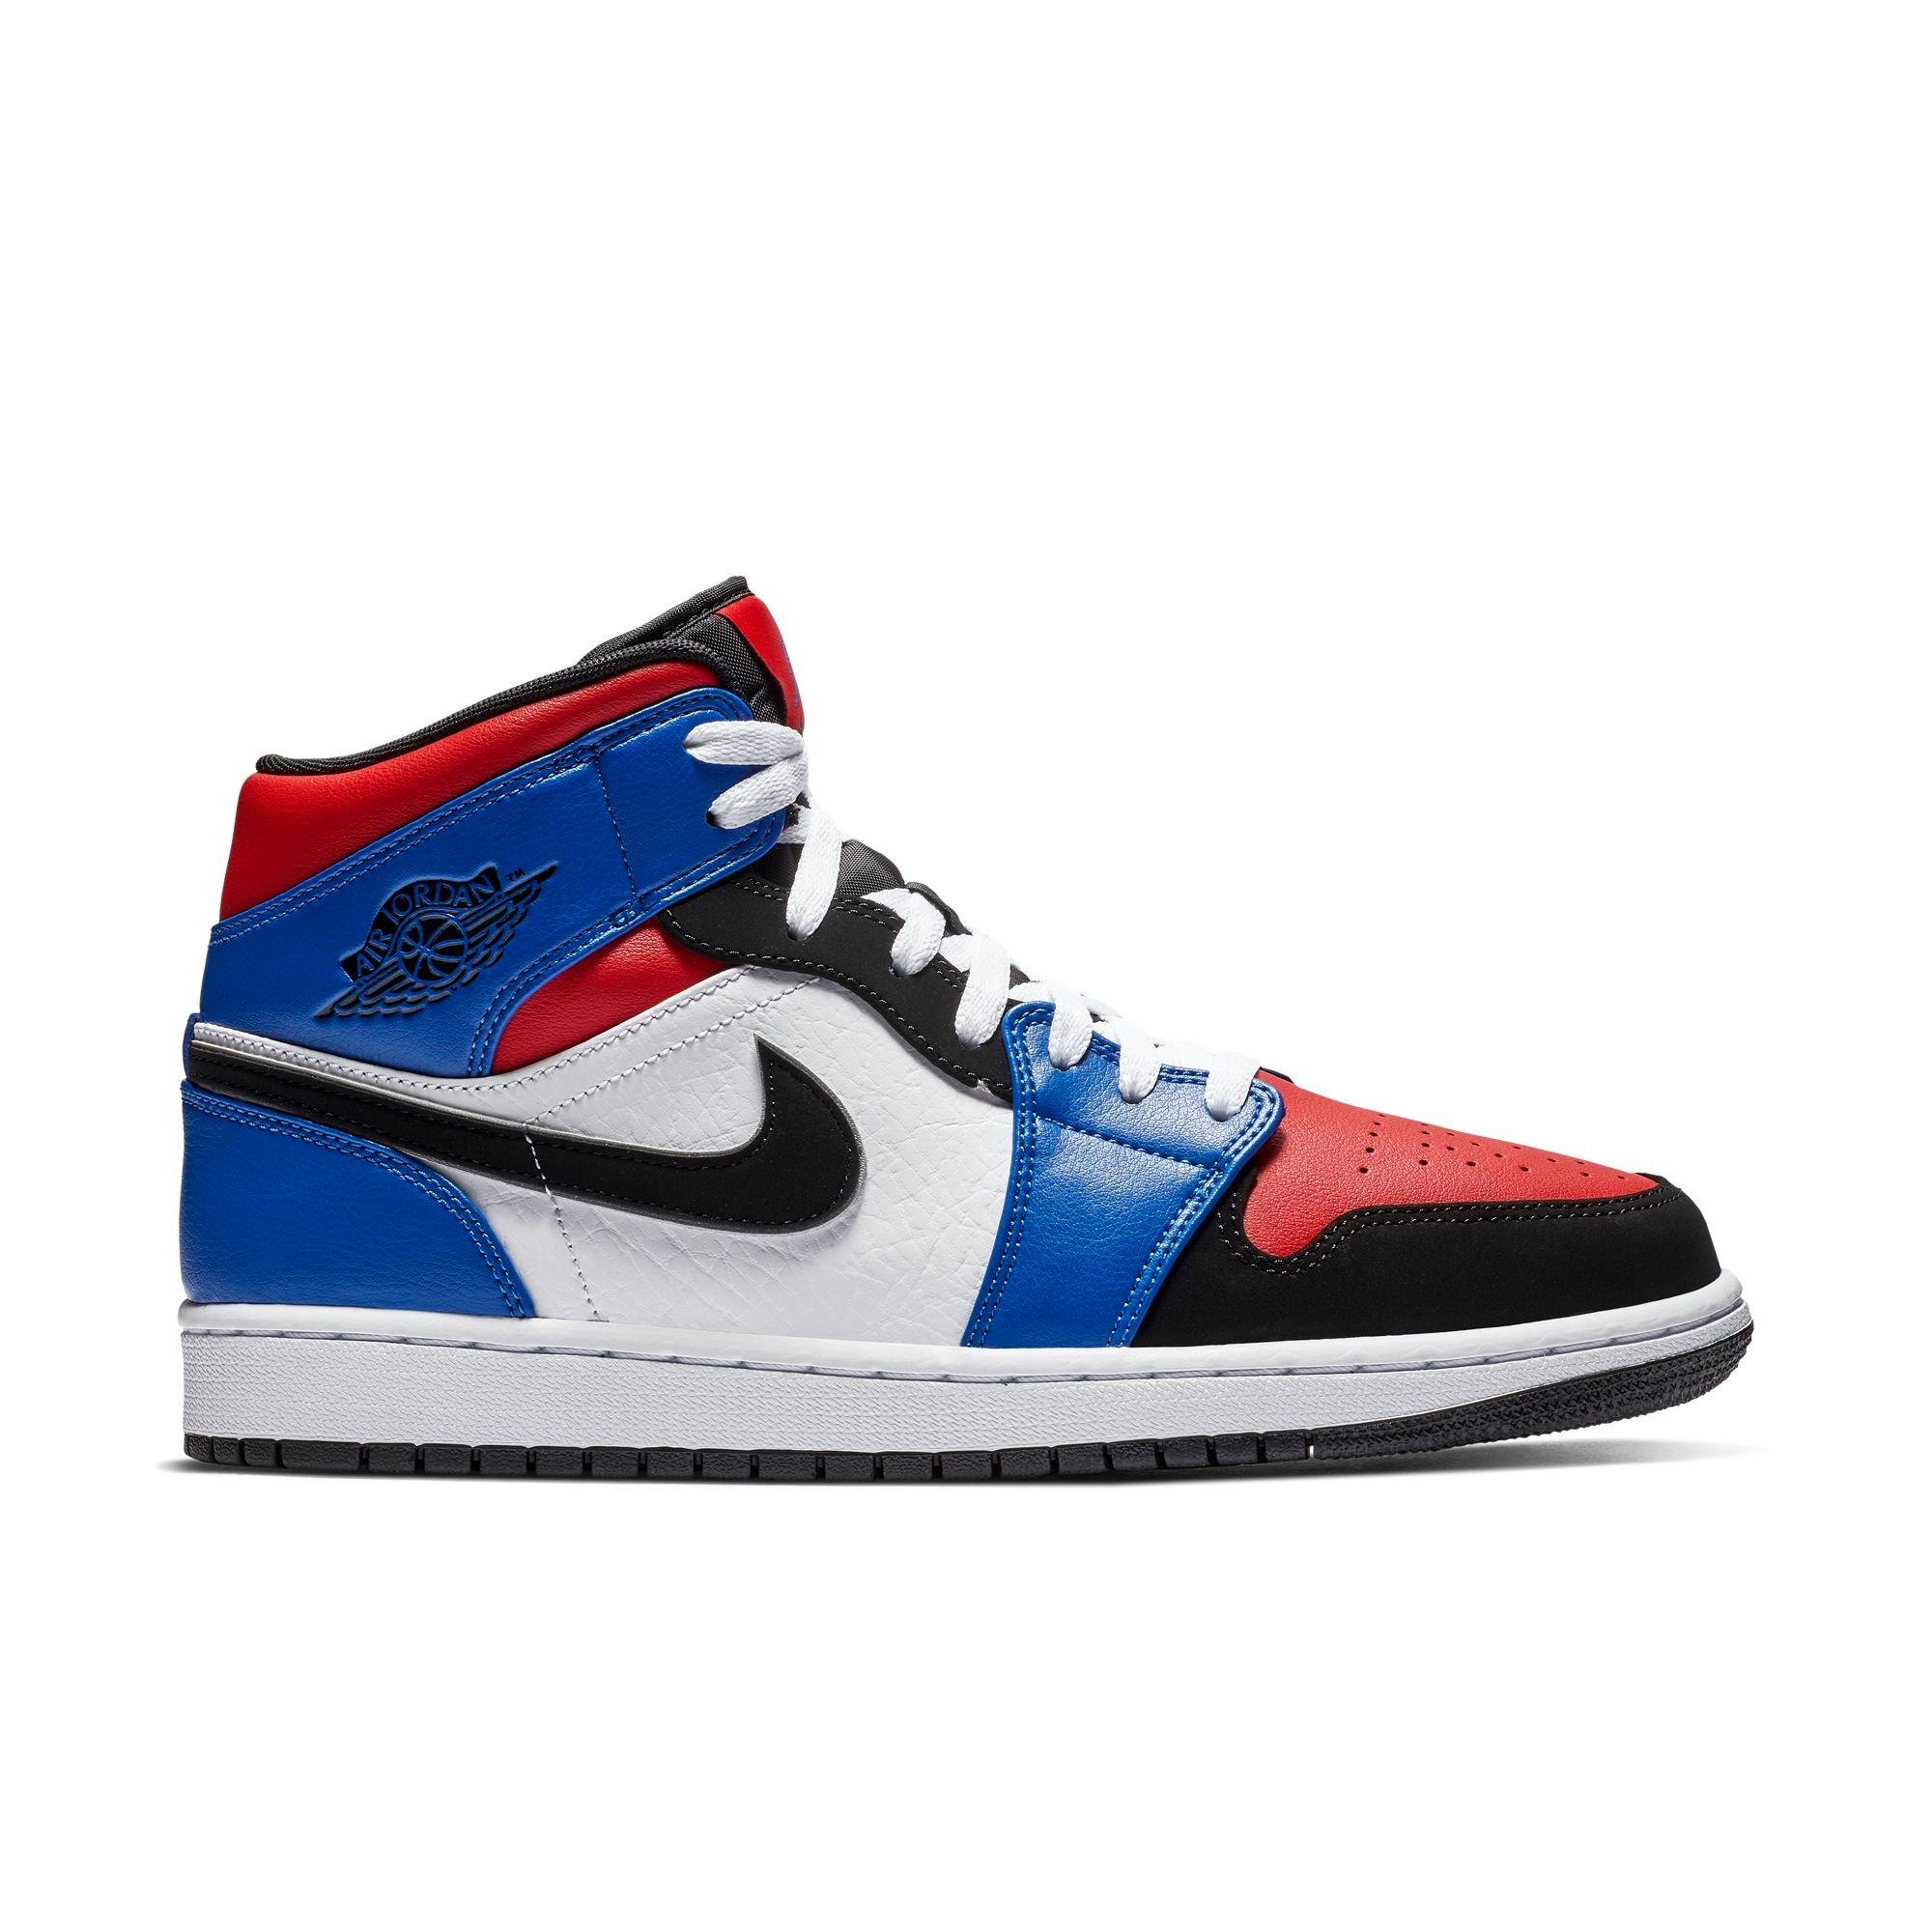 jordan 1 blue and red and white